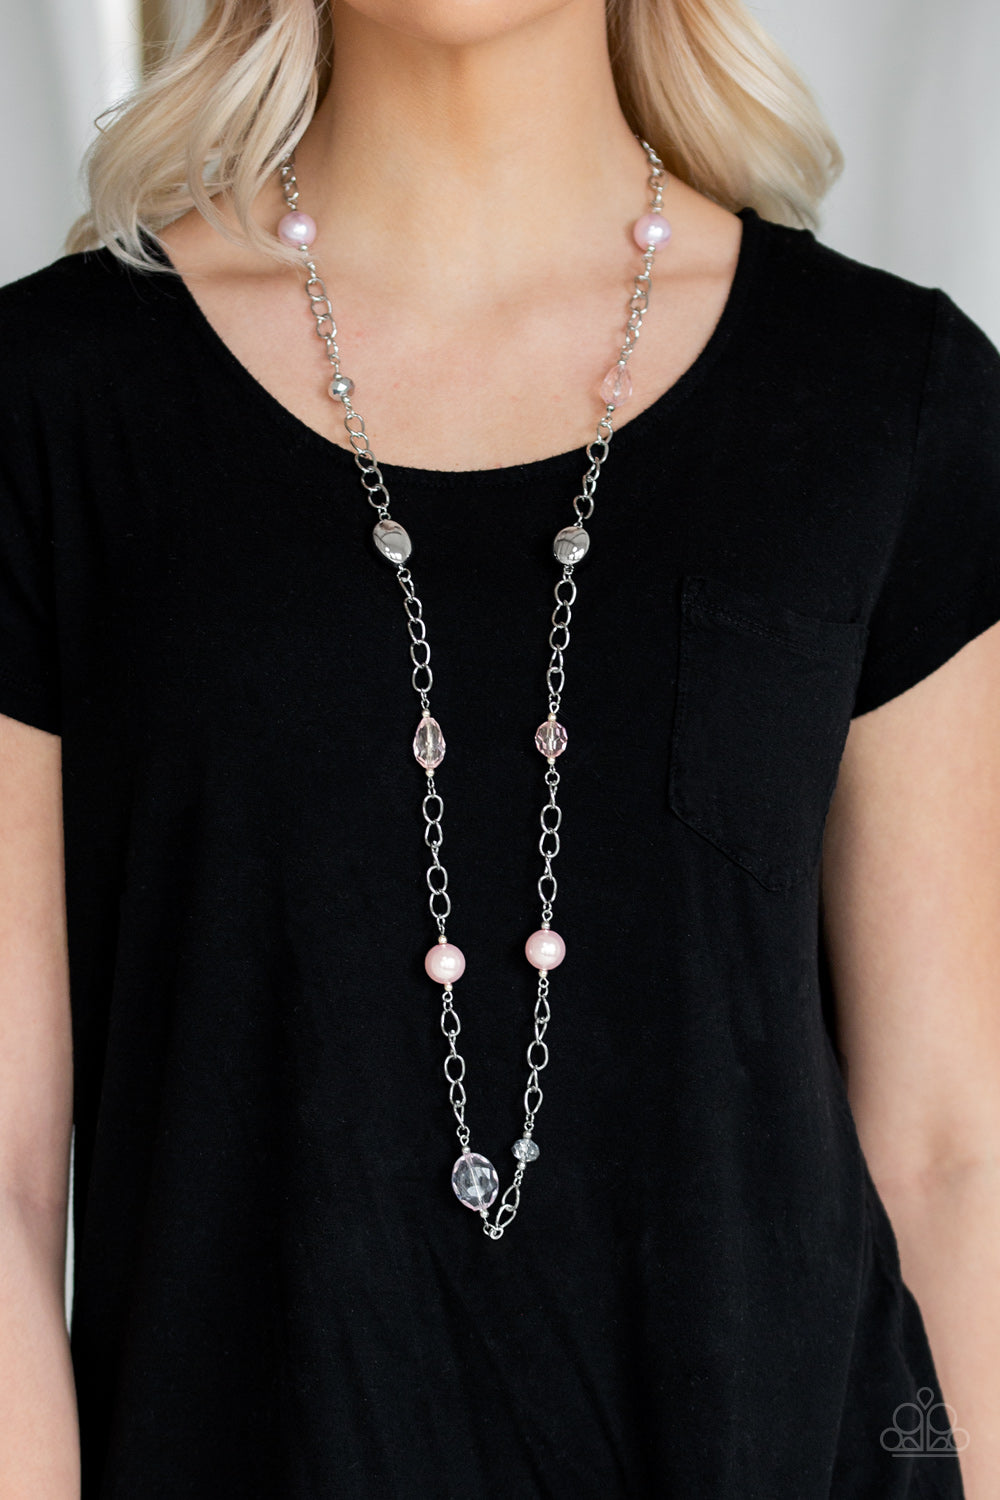 Only For Special Occasions - Pink necklace